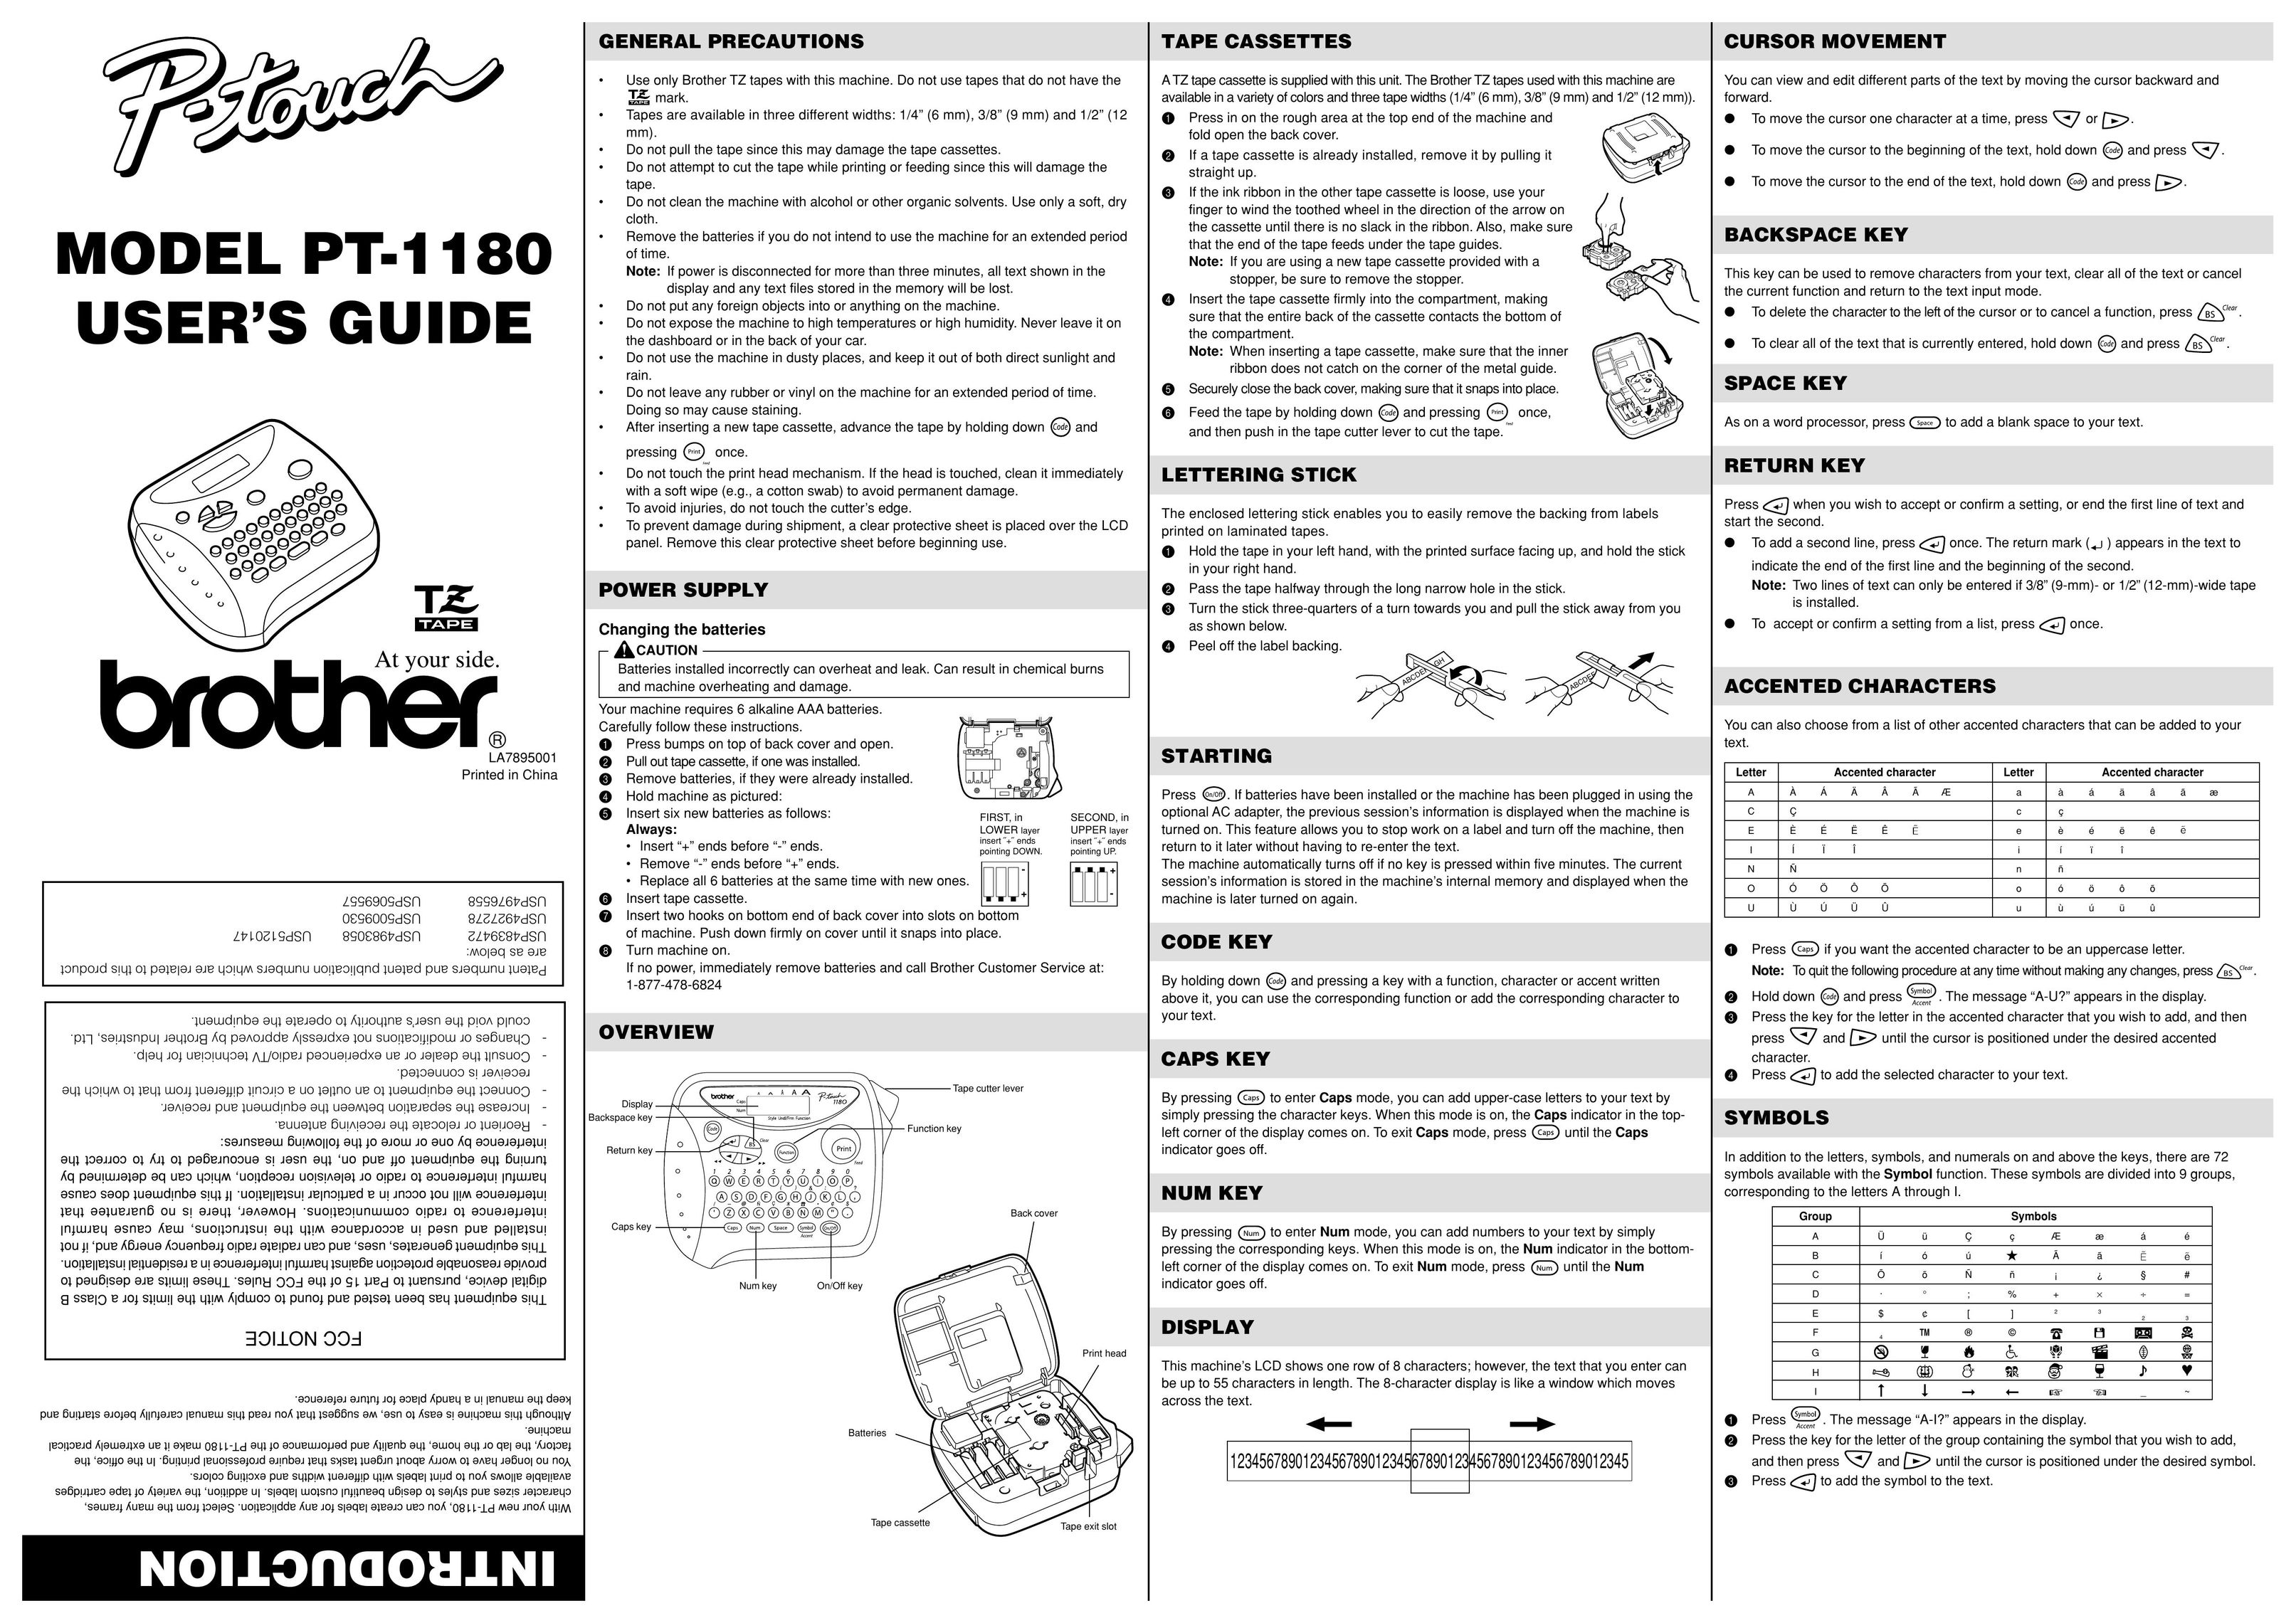 Brother PT-1180 Cassette Player User Manual